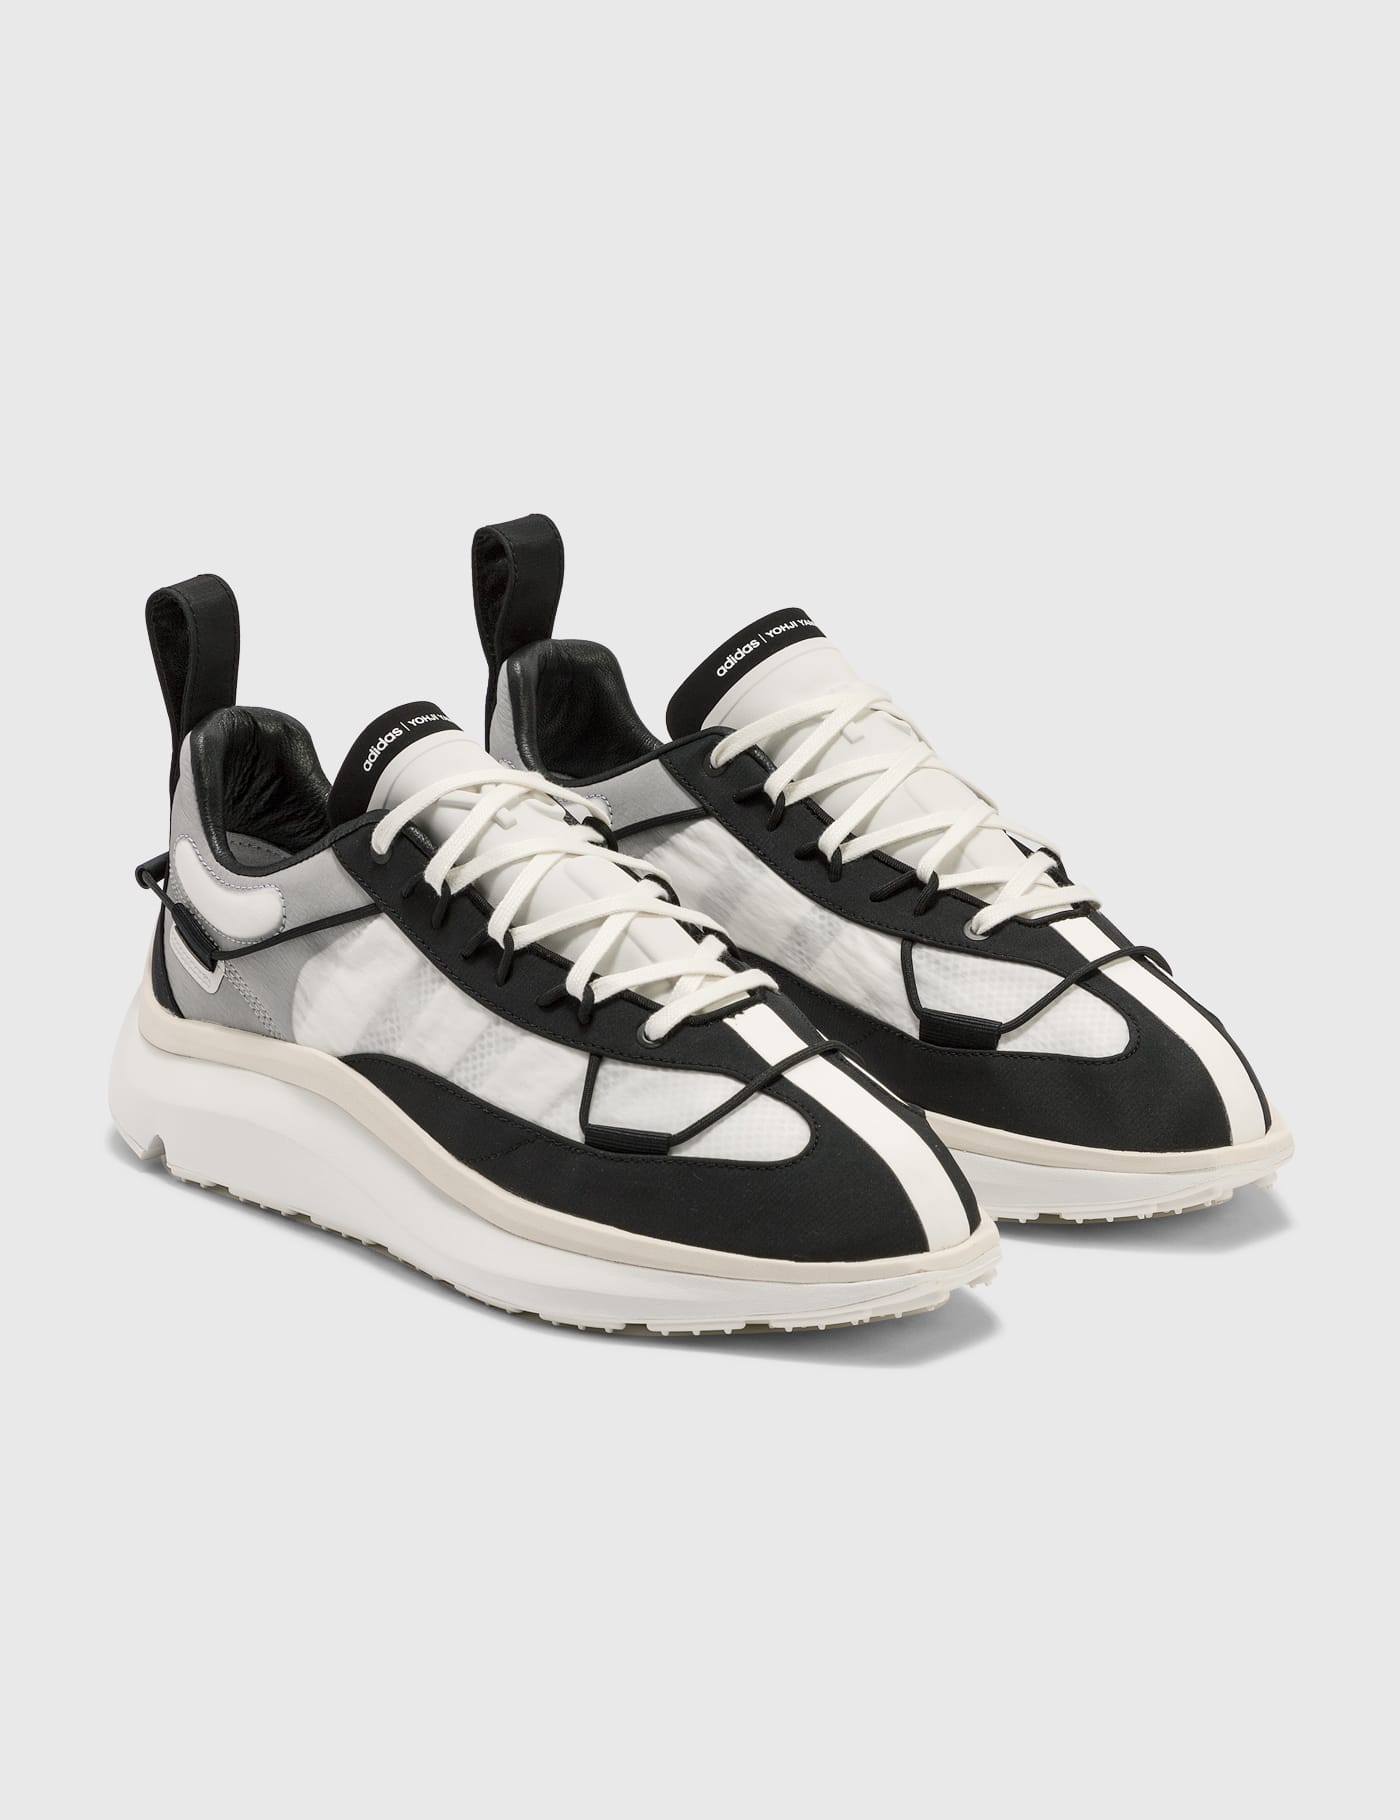 Y-3 - Shiku Run | HBX - Globally Curated Fashion and Lifestyle by 